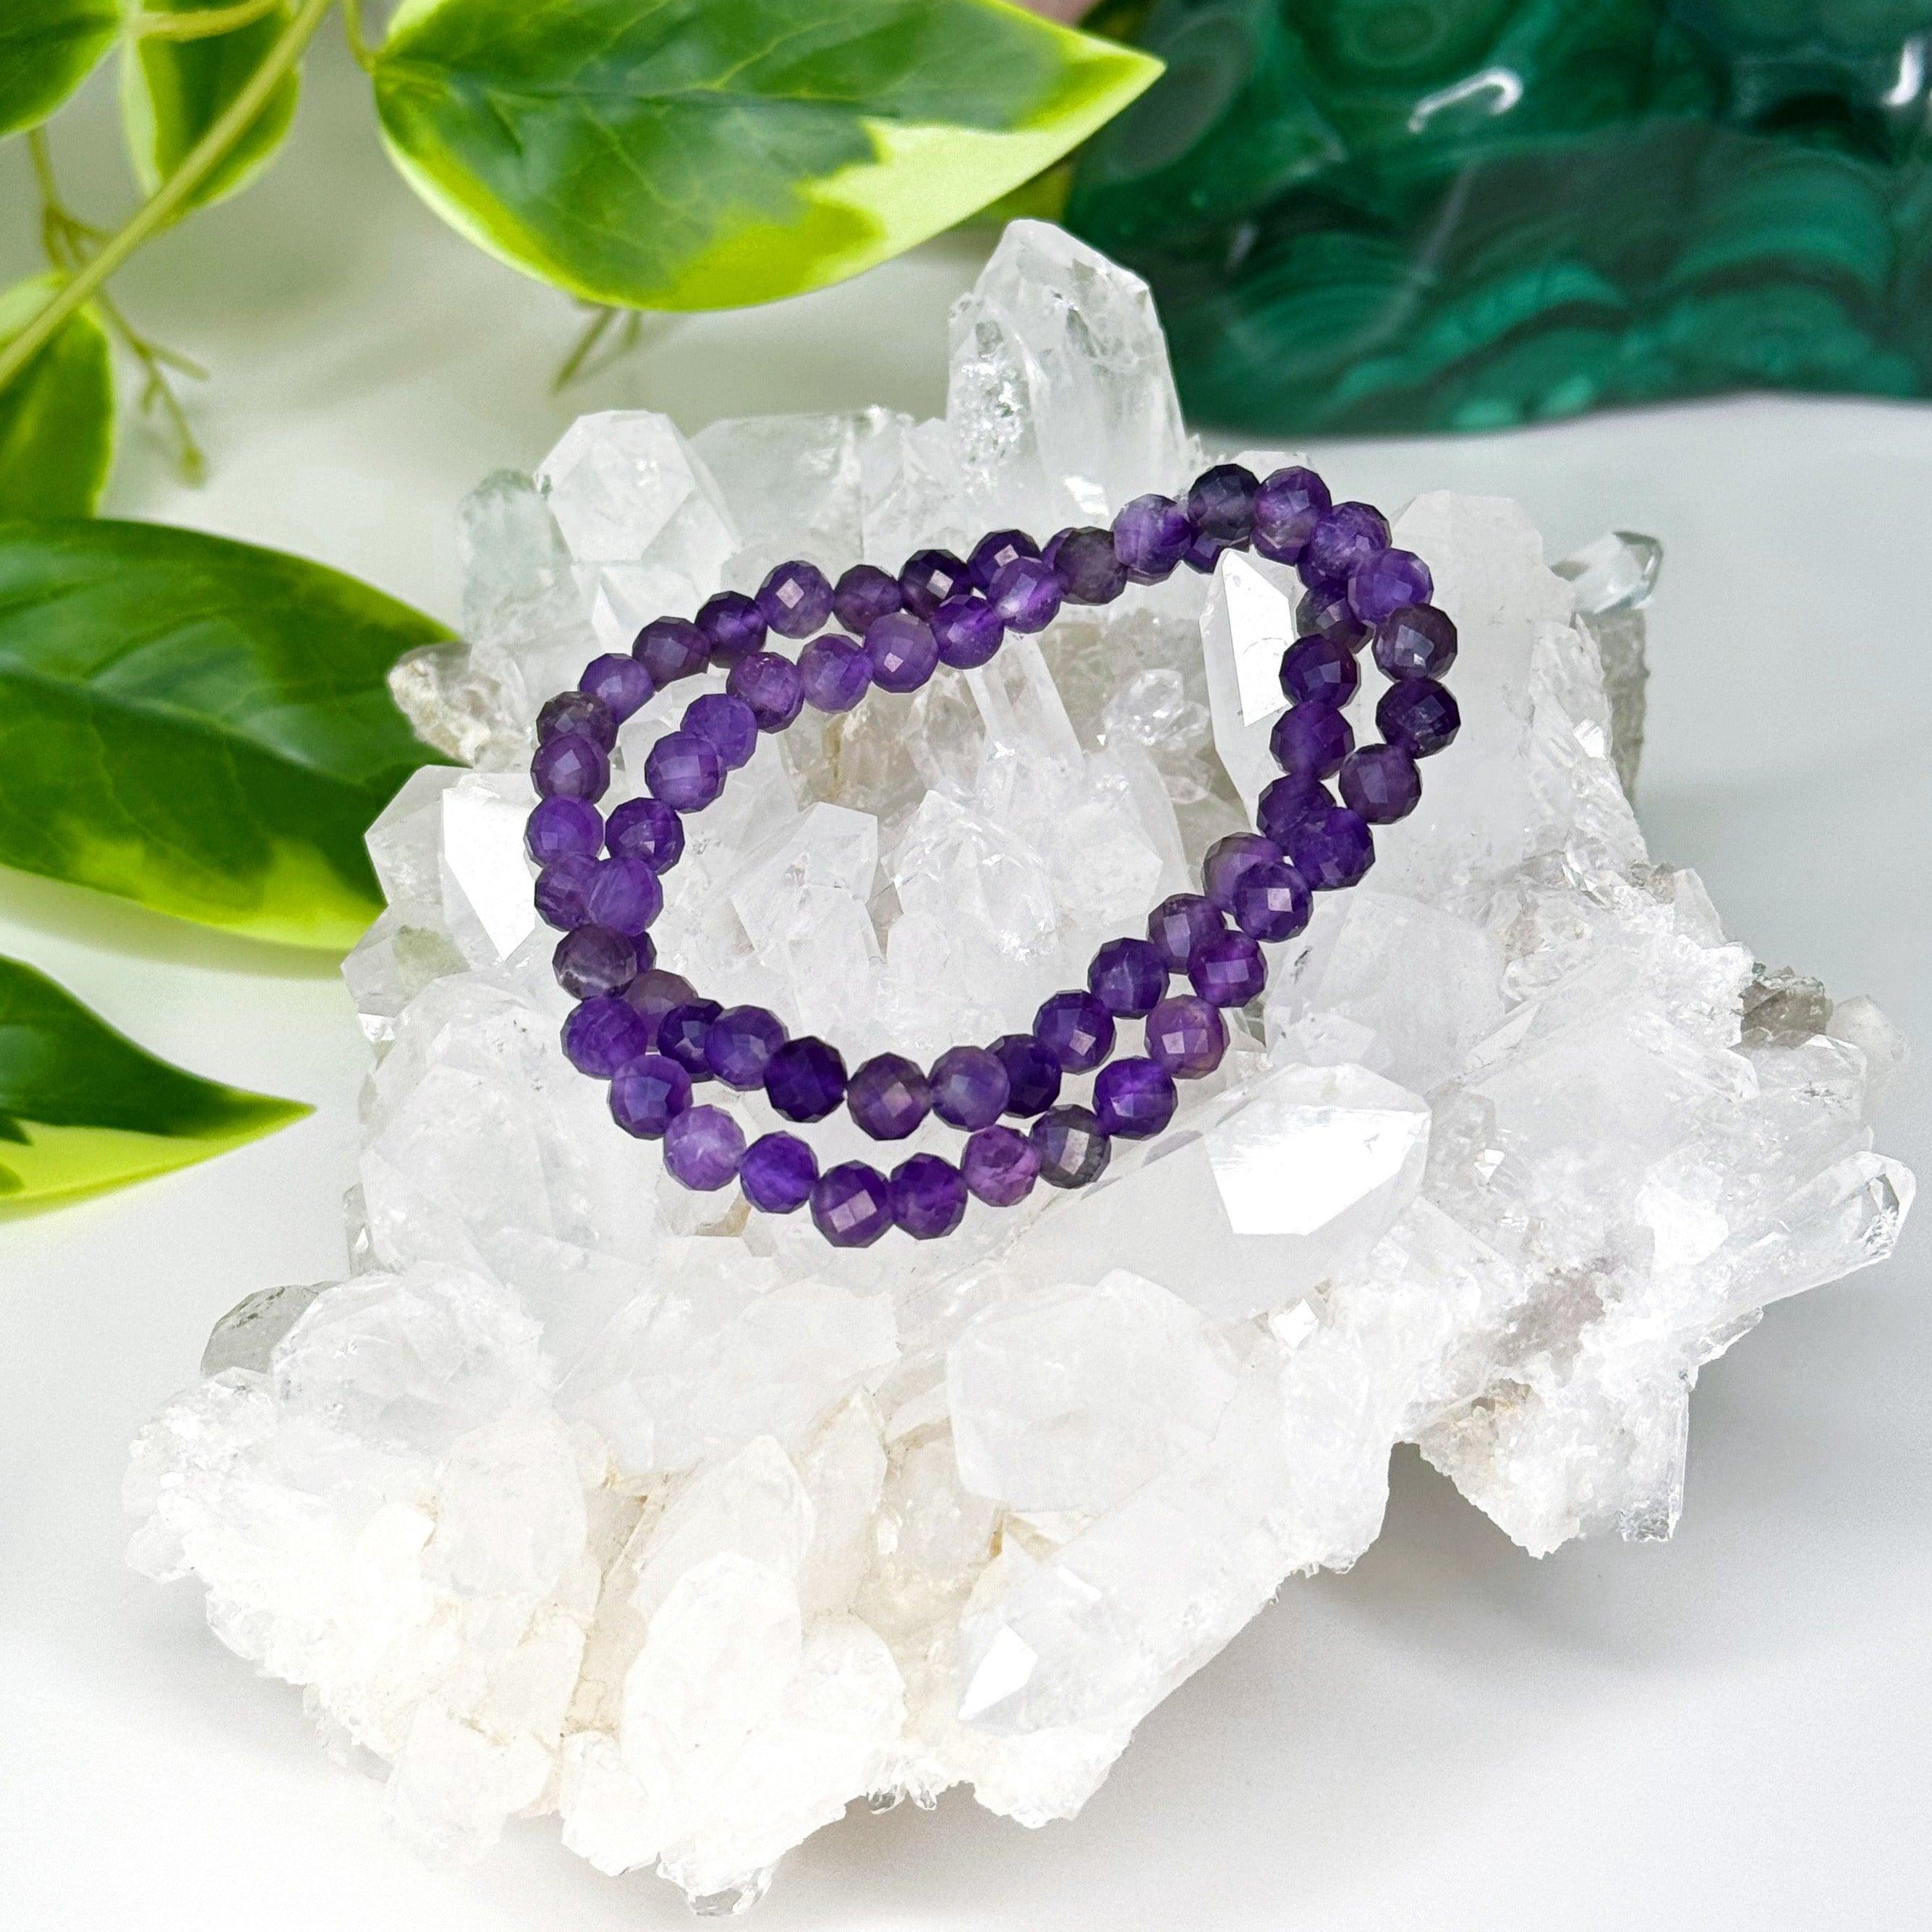 AMETHYST (FACETED) 6mm - HANDMADE CRYSTAL BRACELET - 6mm, air, amethyst, aquarius, aquarius stack, aries, aries stack, bracelet, crystal bracelet, faceted, handmade bracelet, jewelry, libra, libra stack, market bracelet, mercury retrograde, mercury retrograde stack, pisces, pisces stack, purple, recently added, restocked, sagittarius, sagittarius stack, scorpio, Scorpio Season, scorpio stack, storm, virgo, virgo stack, water, Wearable - The Mineral Maven